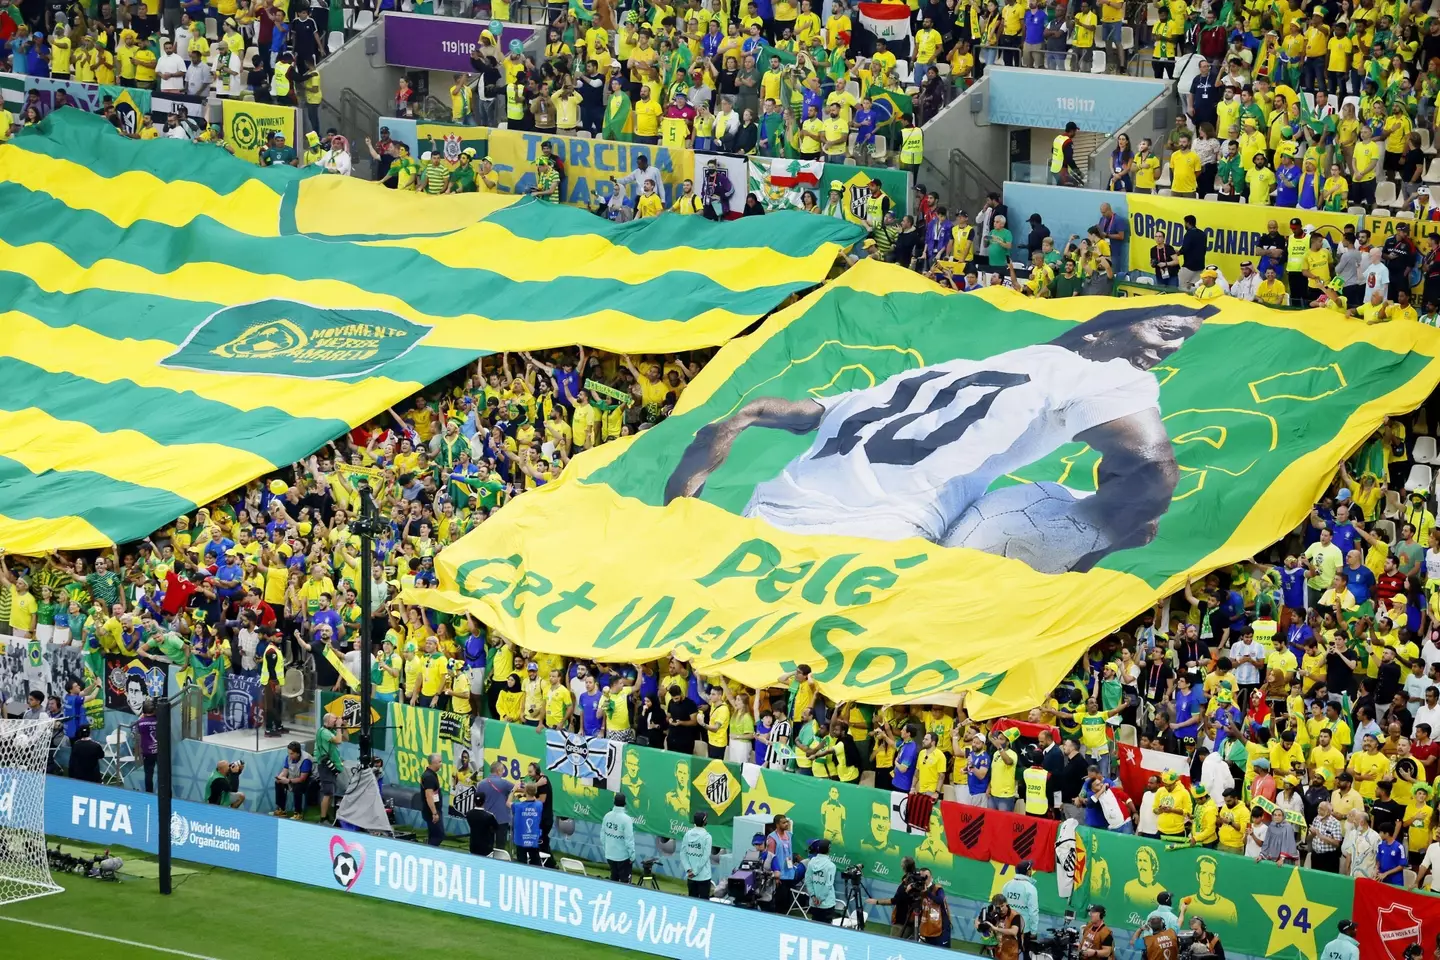 Brazil fans at the World Cup show support for Pele. Image: Alamy